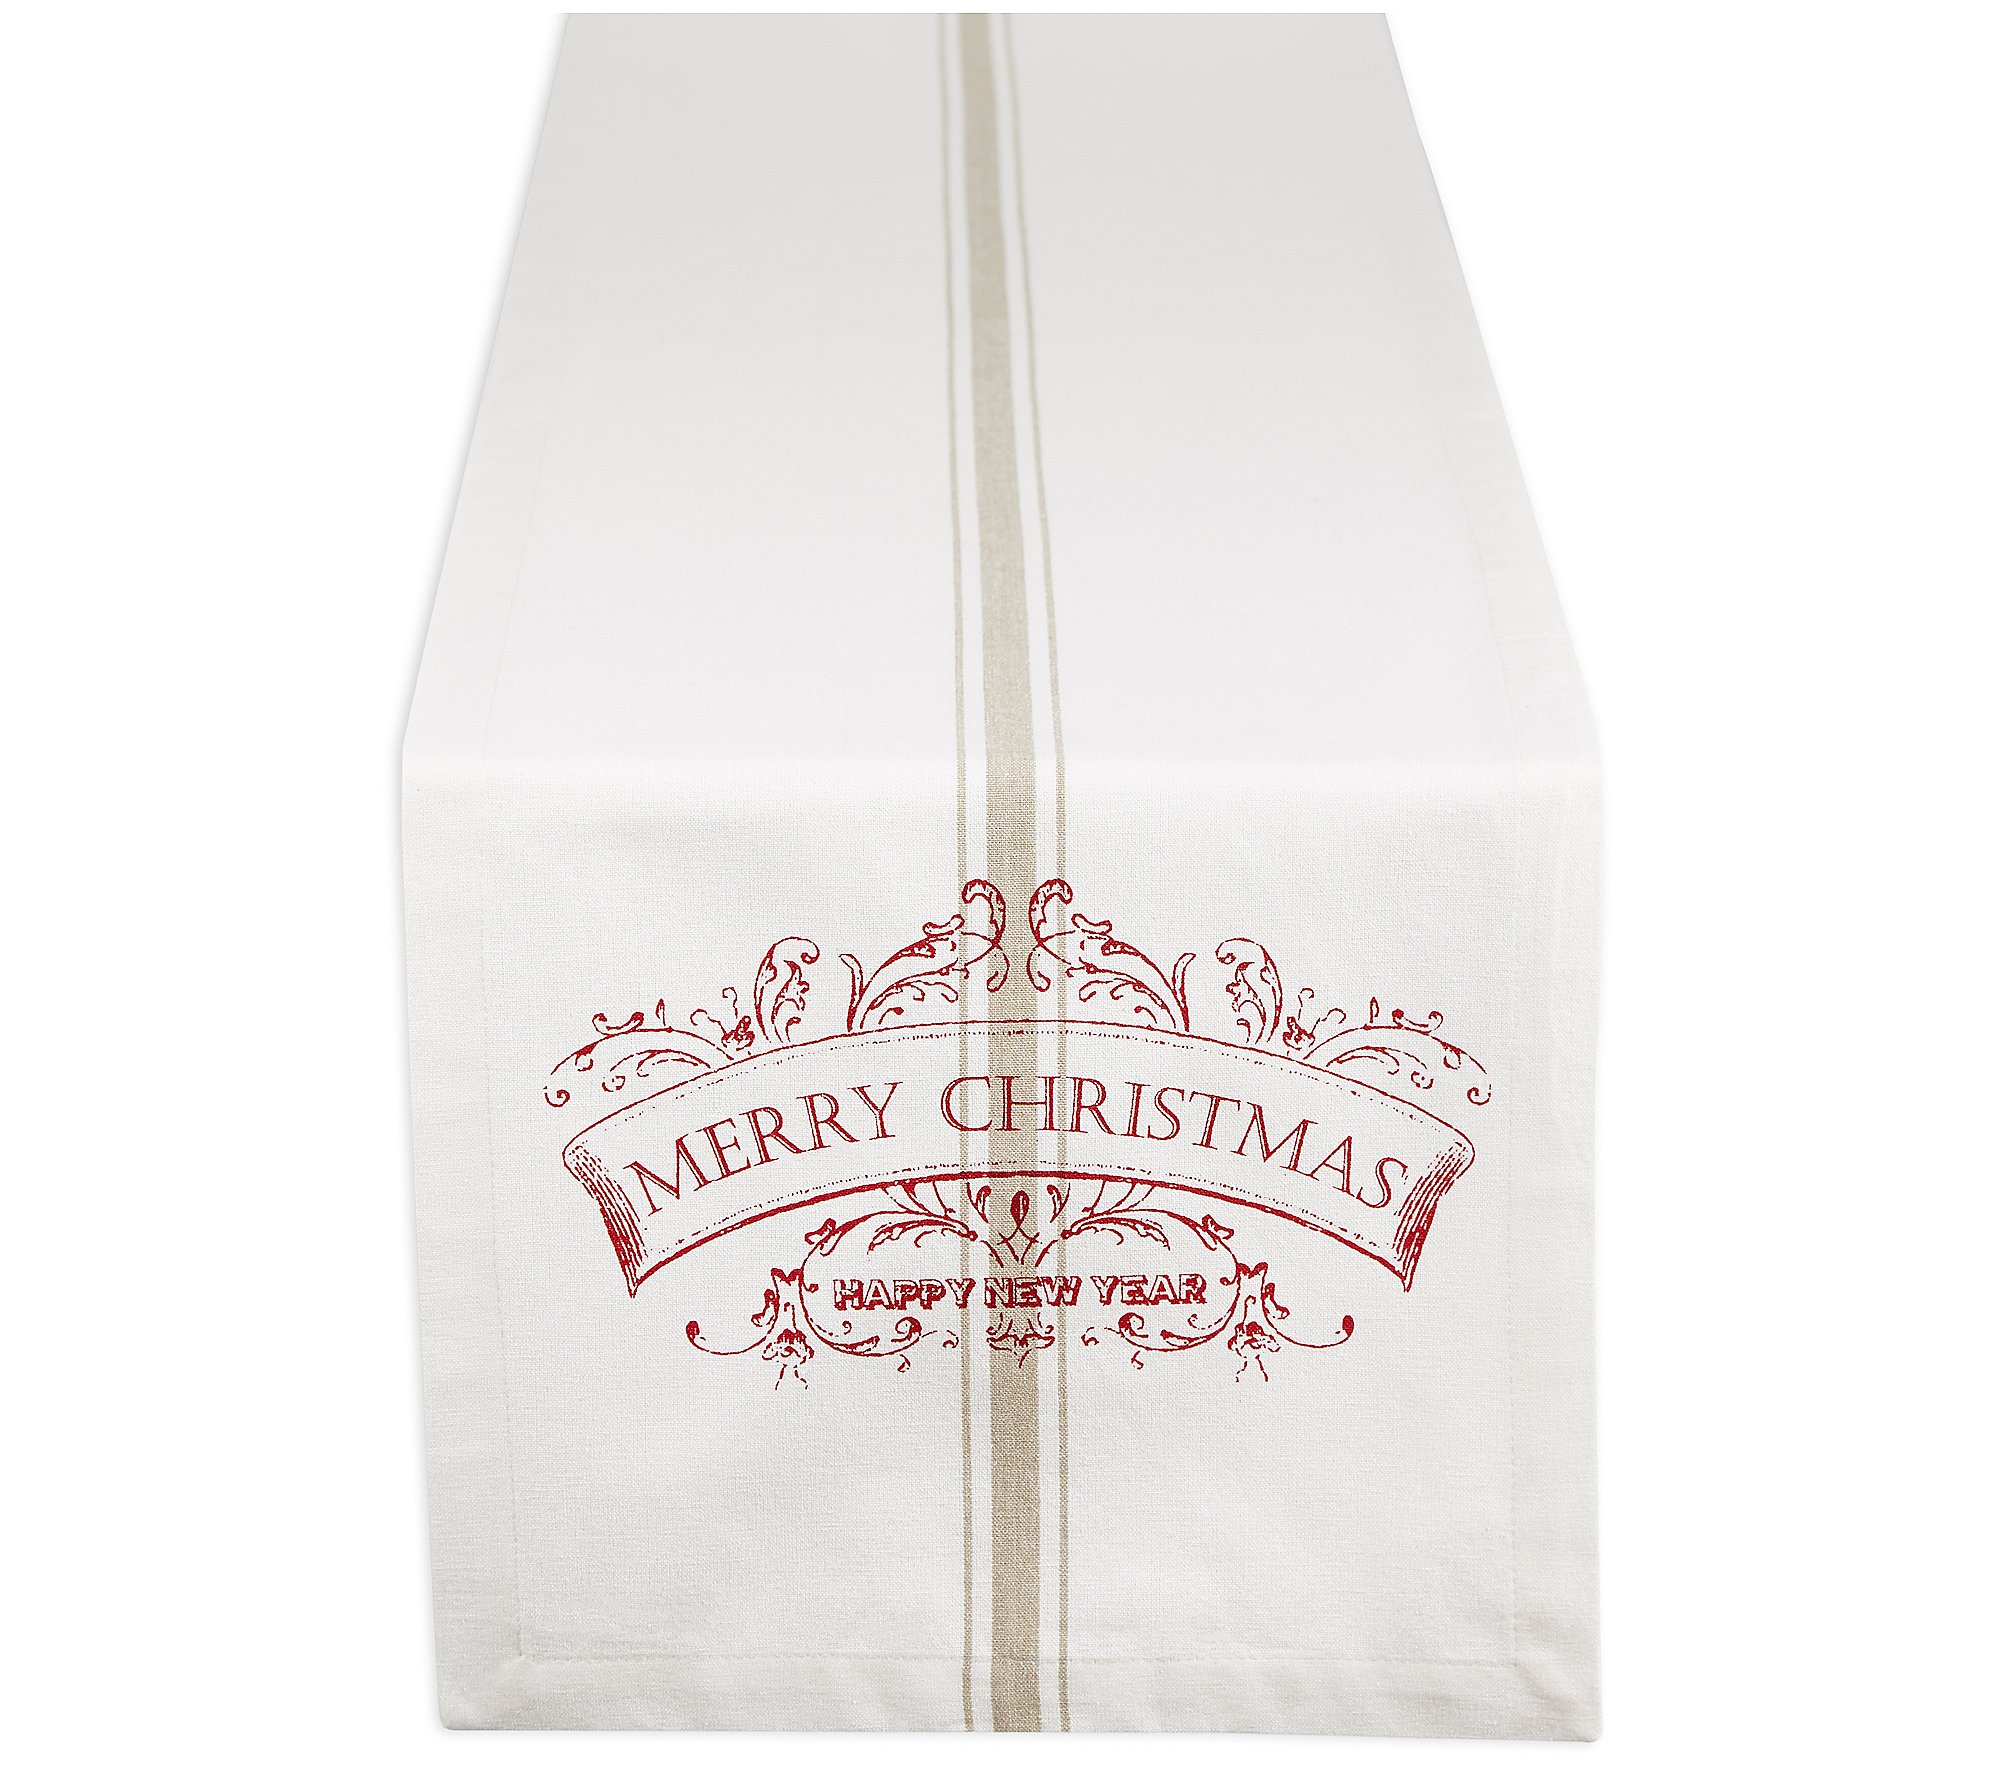 Design Imports Merry Christmas Printed Table Runner 14x108